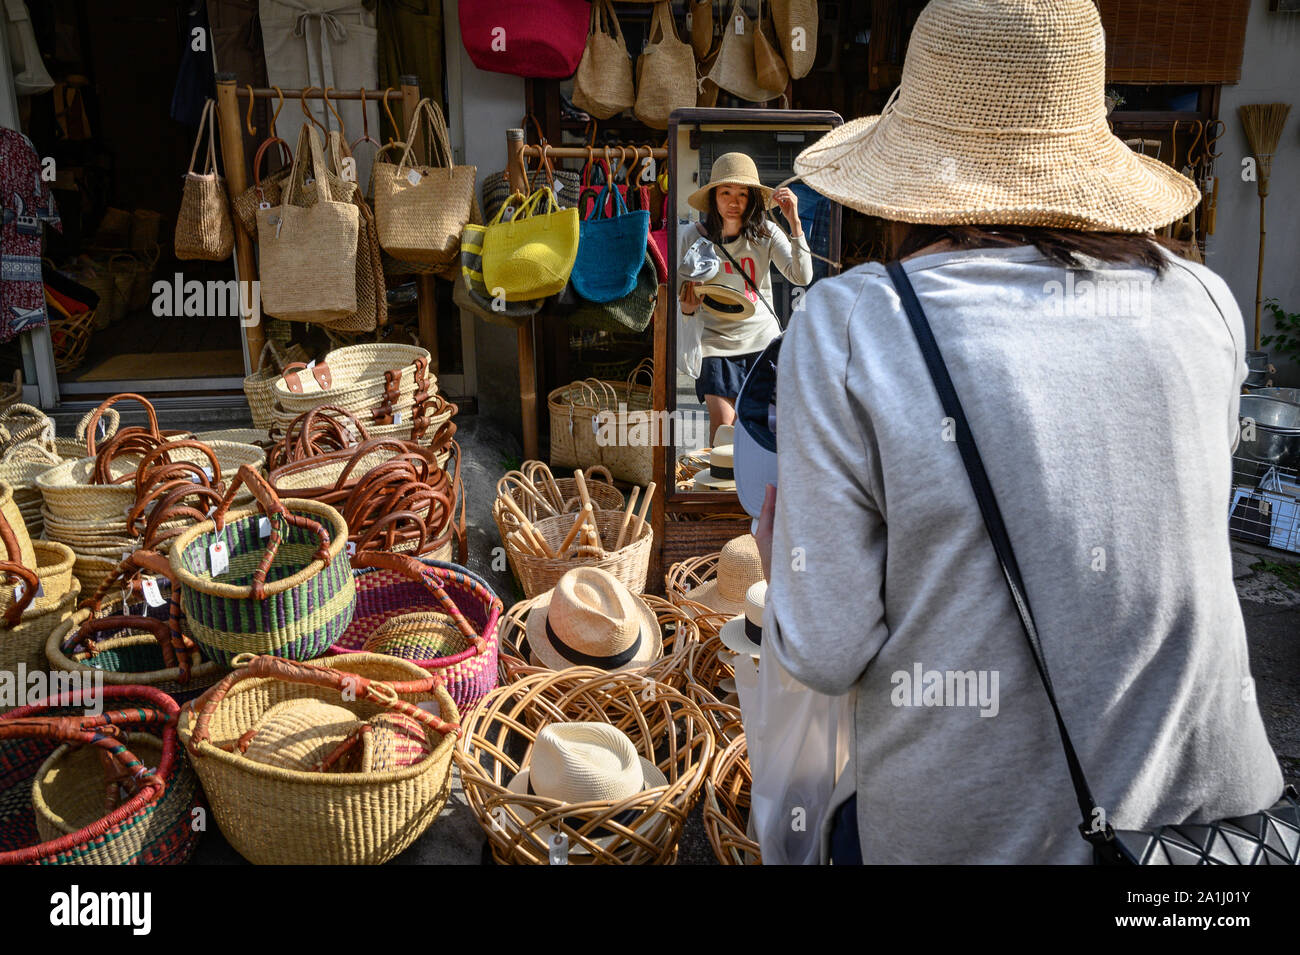 A young woman trying on hats, Yanaka Ginza, Tokyo, Japan Stock Photo